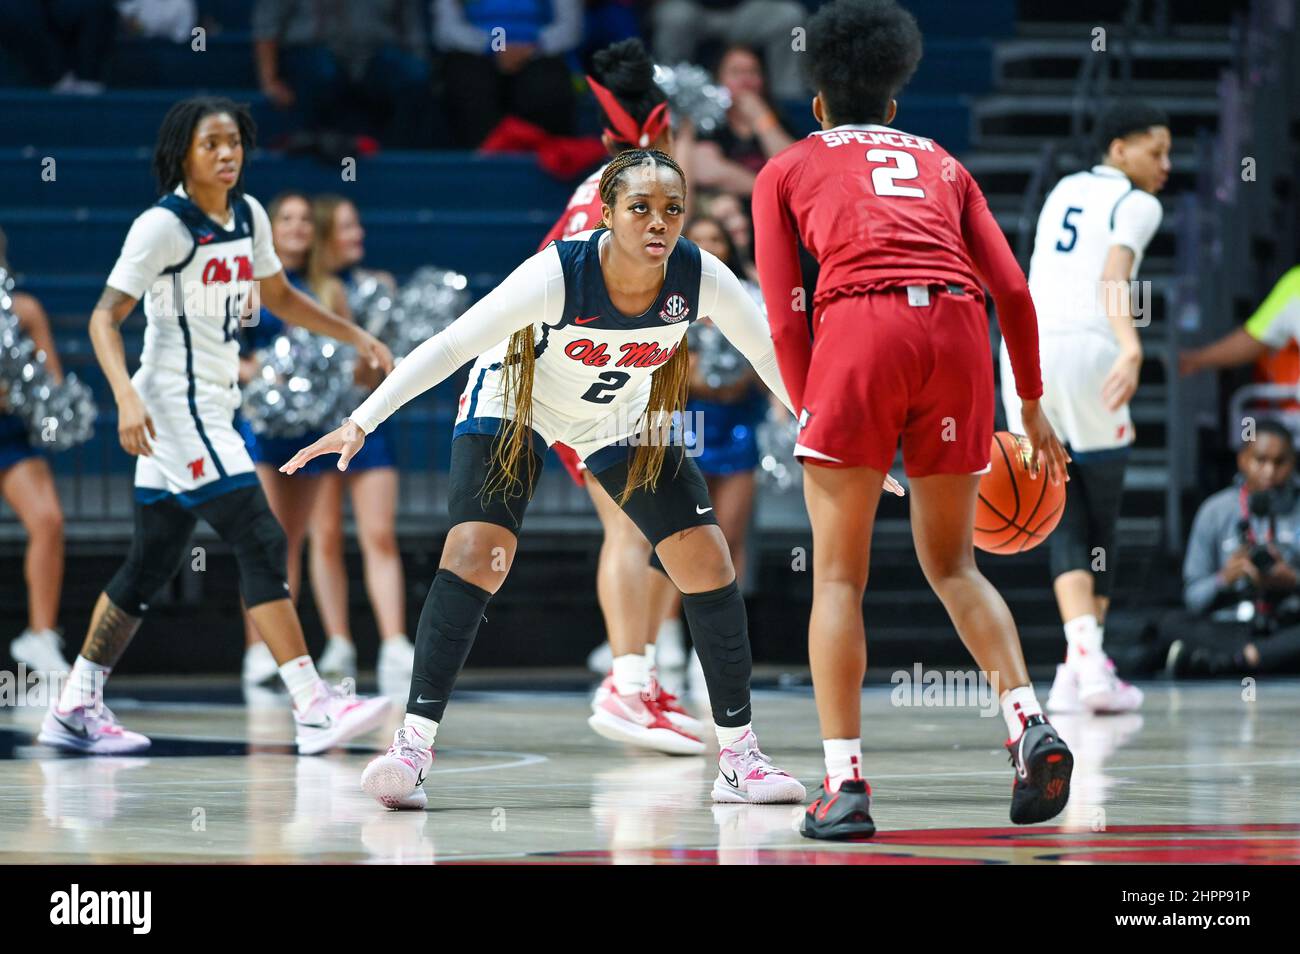 Oxford, MS, USA. 22nd Feb, 2022. Ole' Miss guard Mimi Reid (2) on the defensive against Arkansas guard Samara Spencer (2) during the college basketball game between the Arkansas Razorbacks and the Ole' Miss Rebels on February 22, 2022 at the SJB Pavilion in Oxford, MS. (Photo by: Kevin Langley/CSM). Credit: csm/Alamy Live News Stock Photo